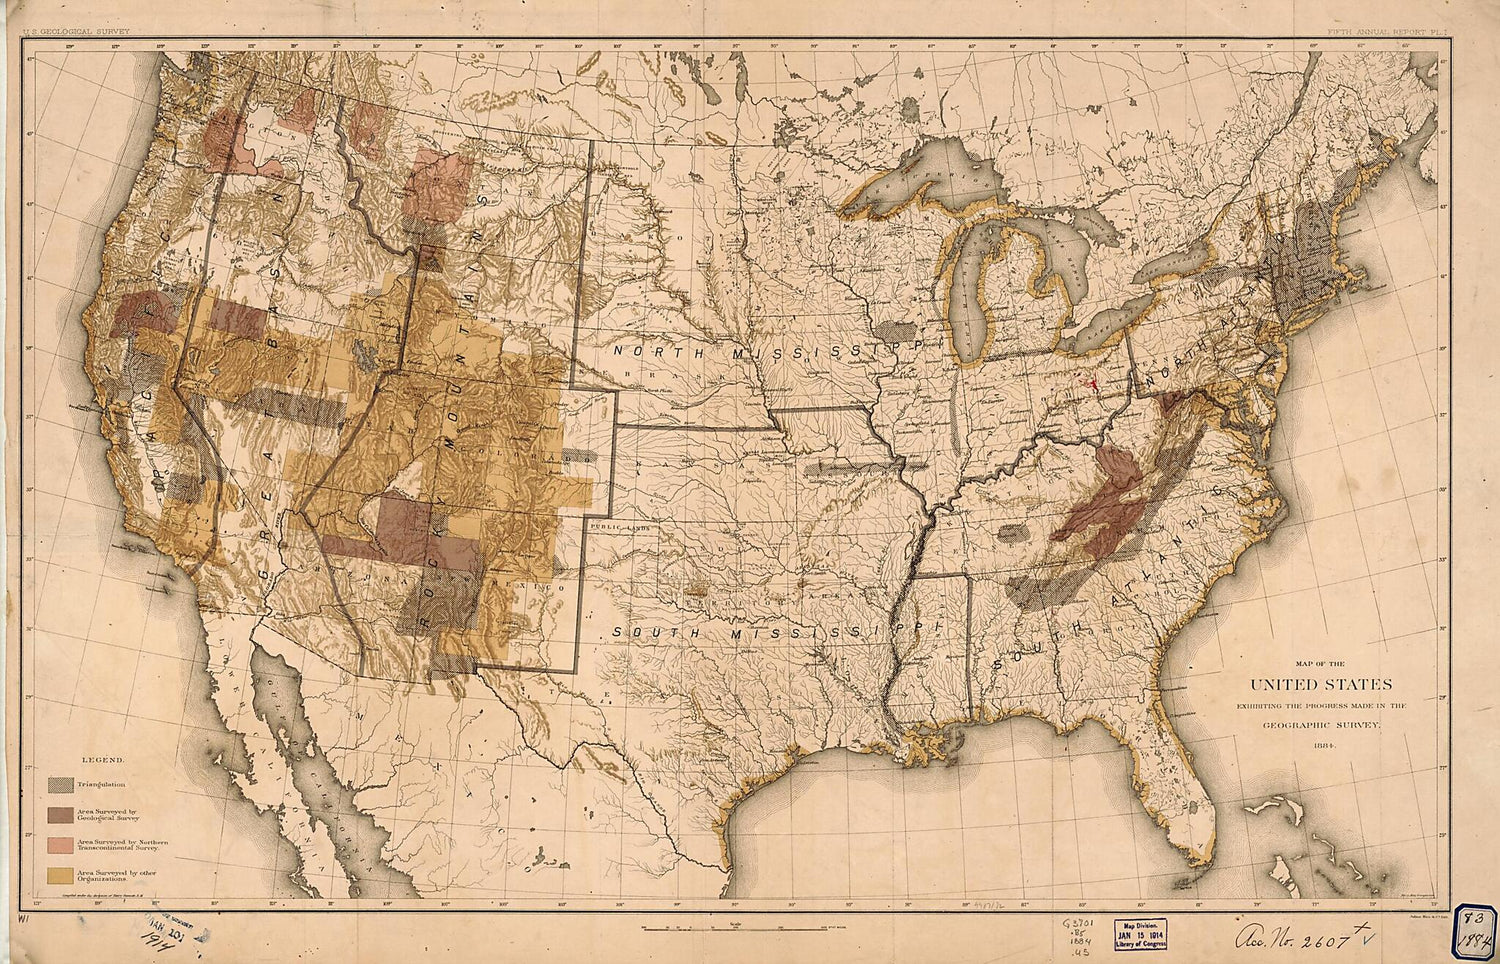 This old map of Map of the United States Showing Progress In Preparation and Engraving of Topographic Maps from 1884 was created by Henry Gannett,  Geological Survey (U.S.) in 1884